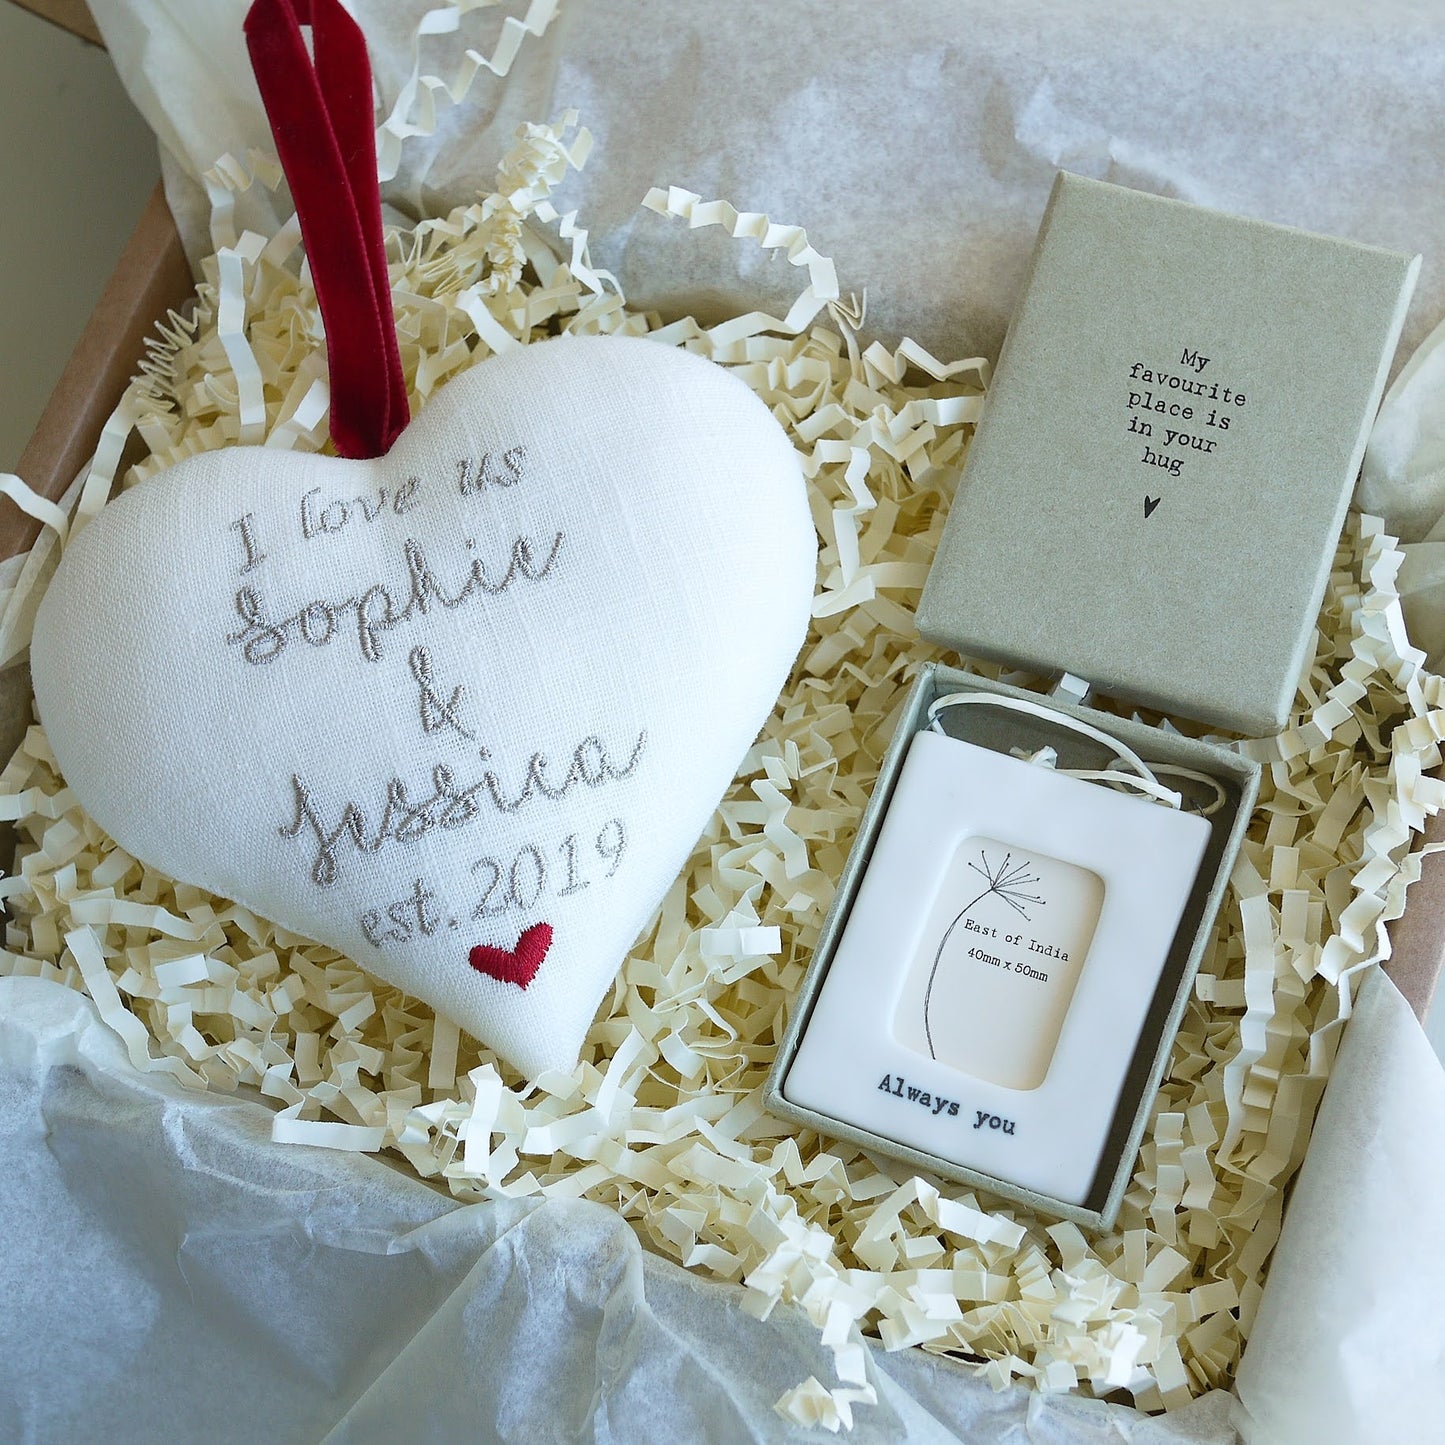 Valentines Day ’I Love Us’ Gift Heart with Tiny Photo Frame Personalised Valentine’s Day Gifts